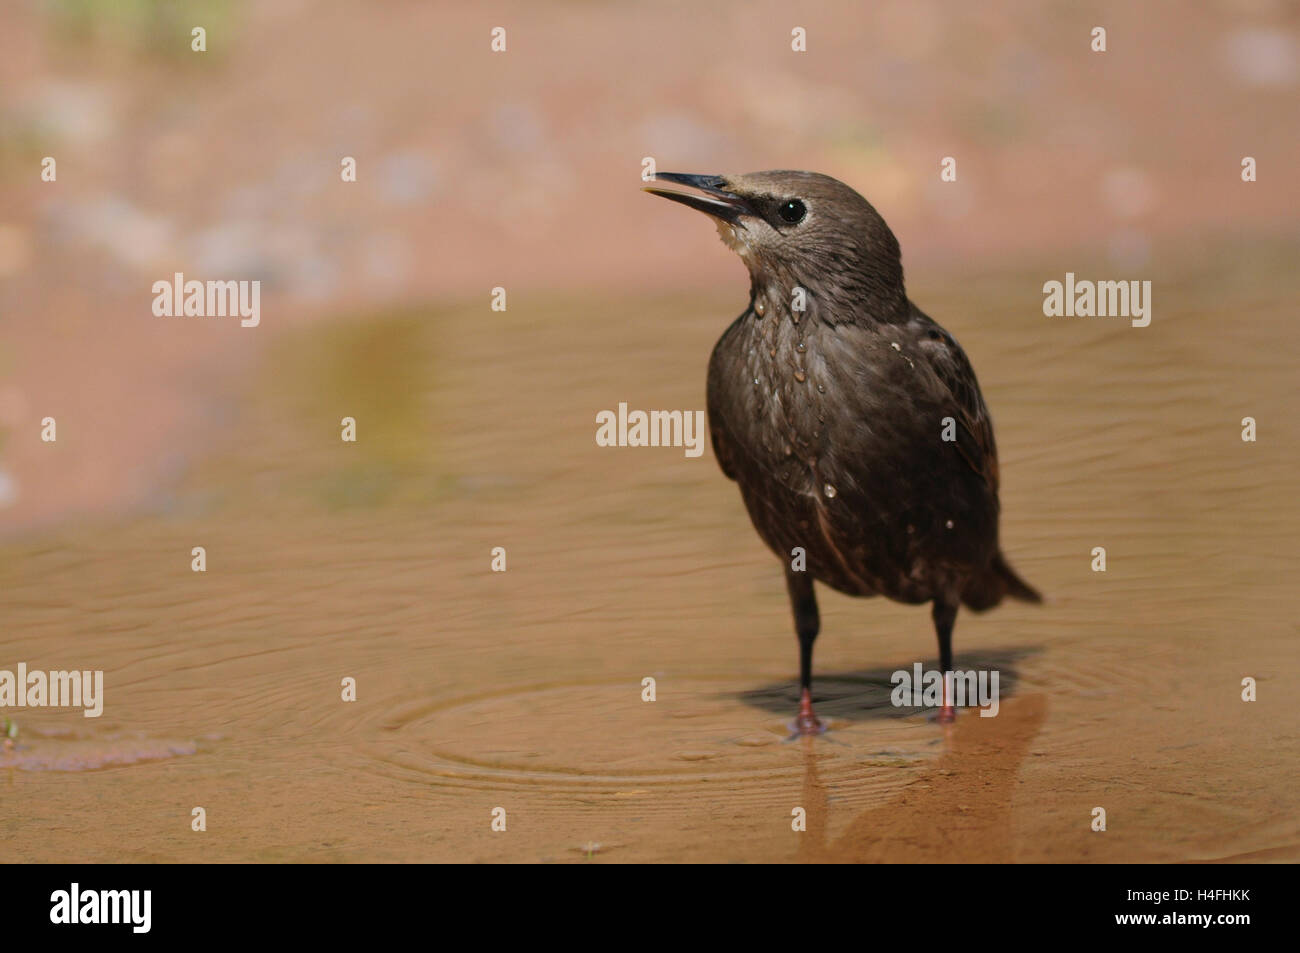 Juvenile starling drinking from puddle Stock Photo